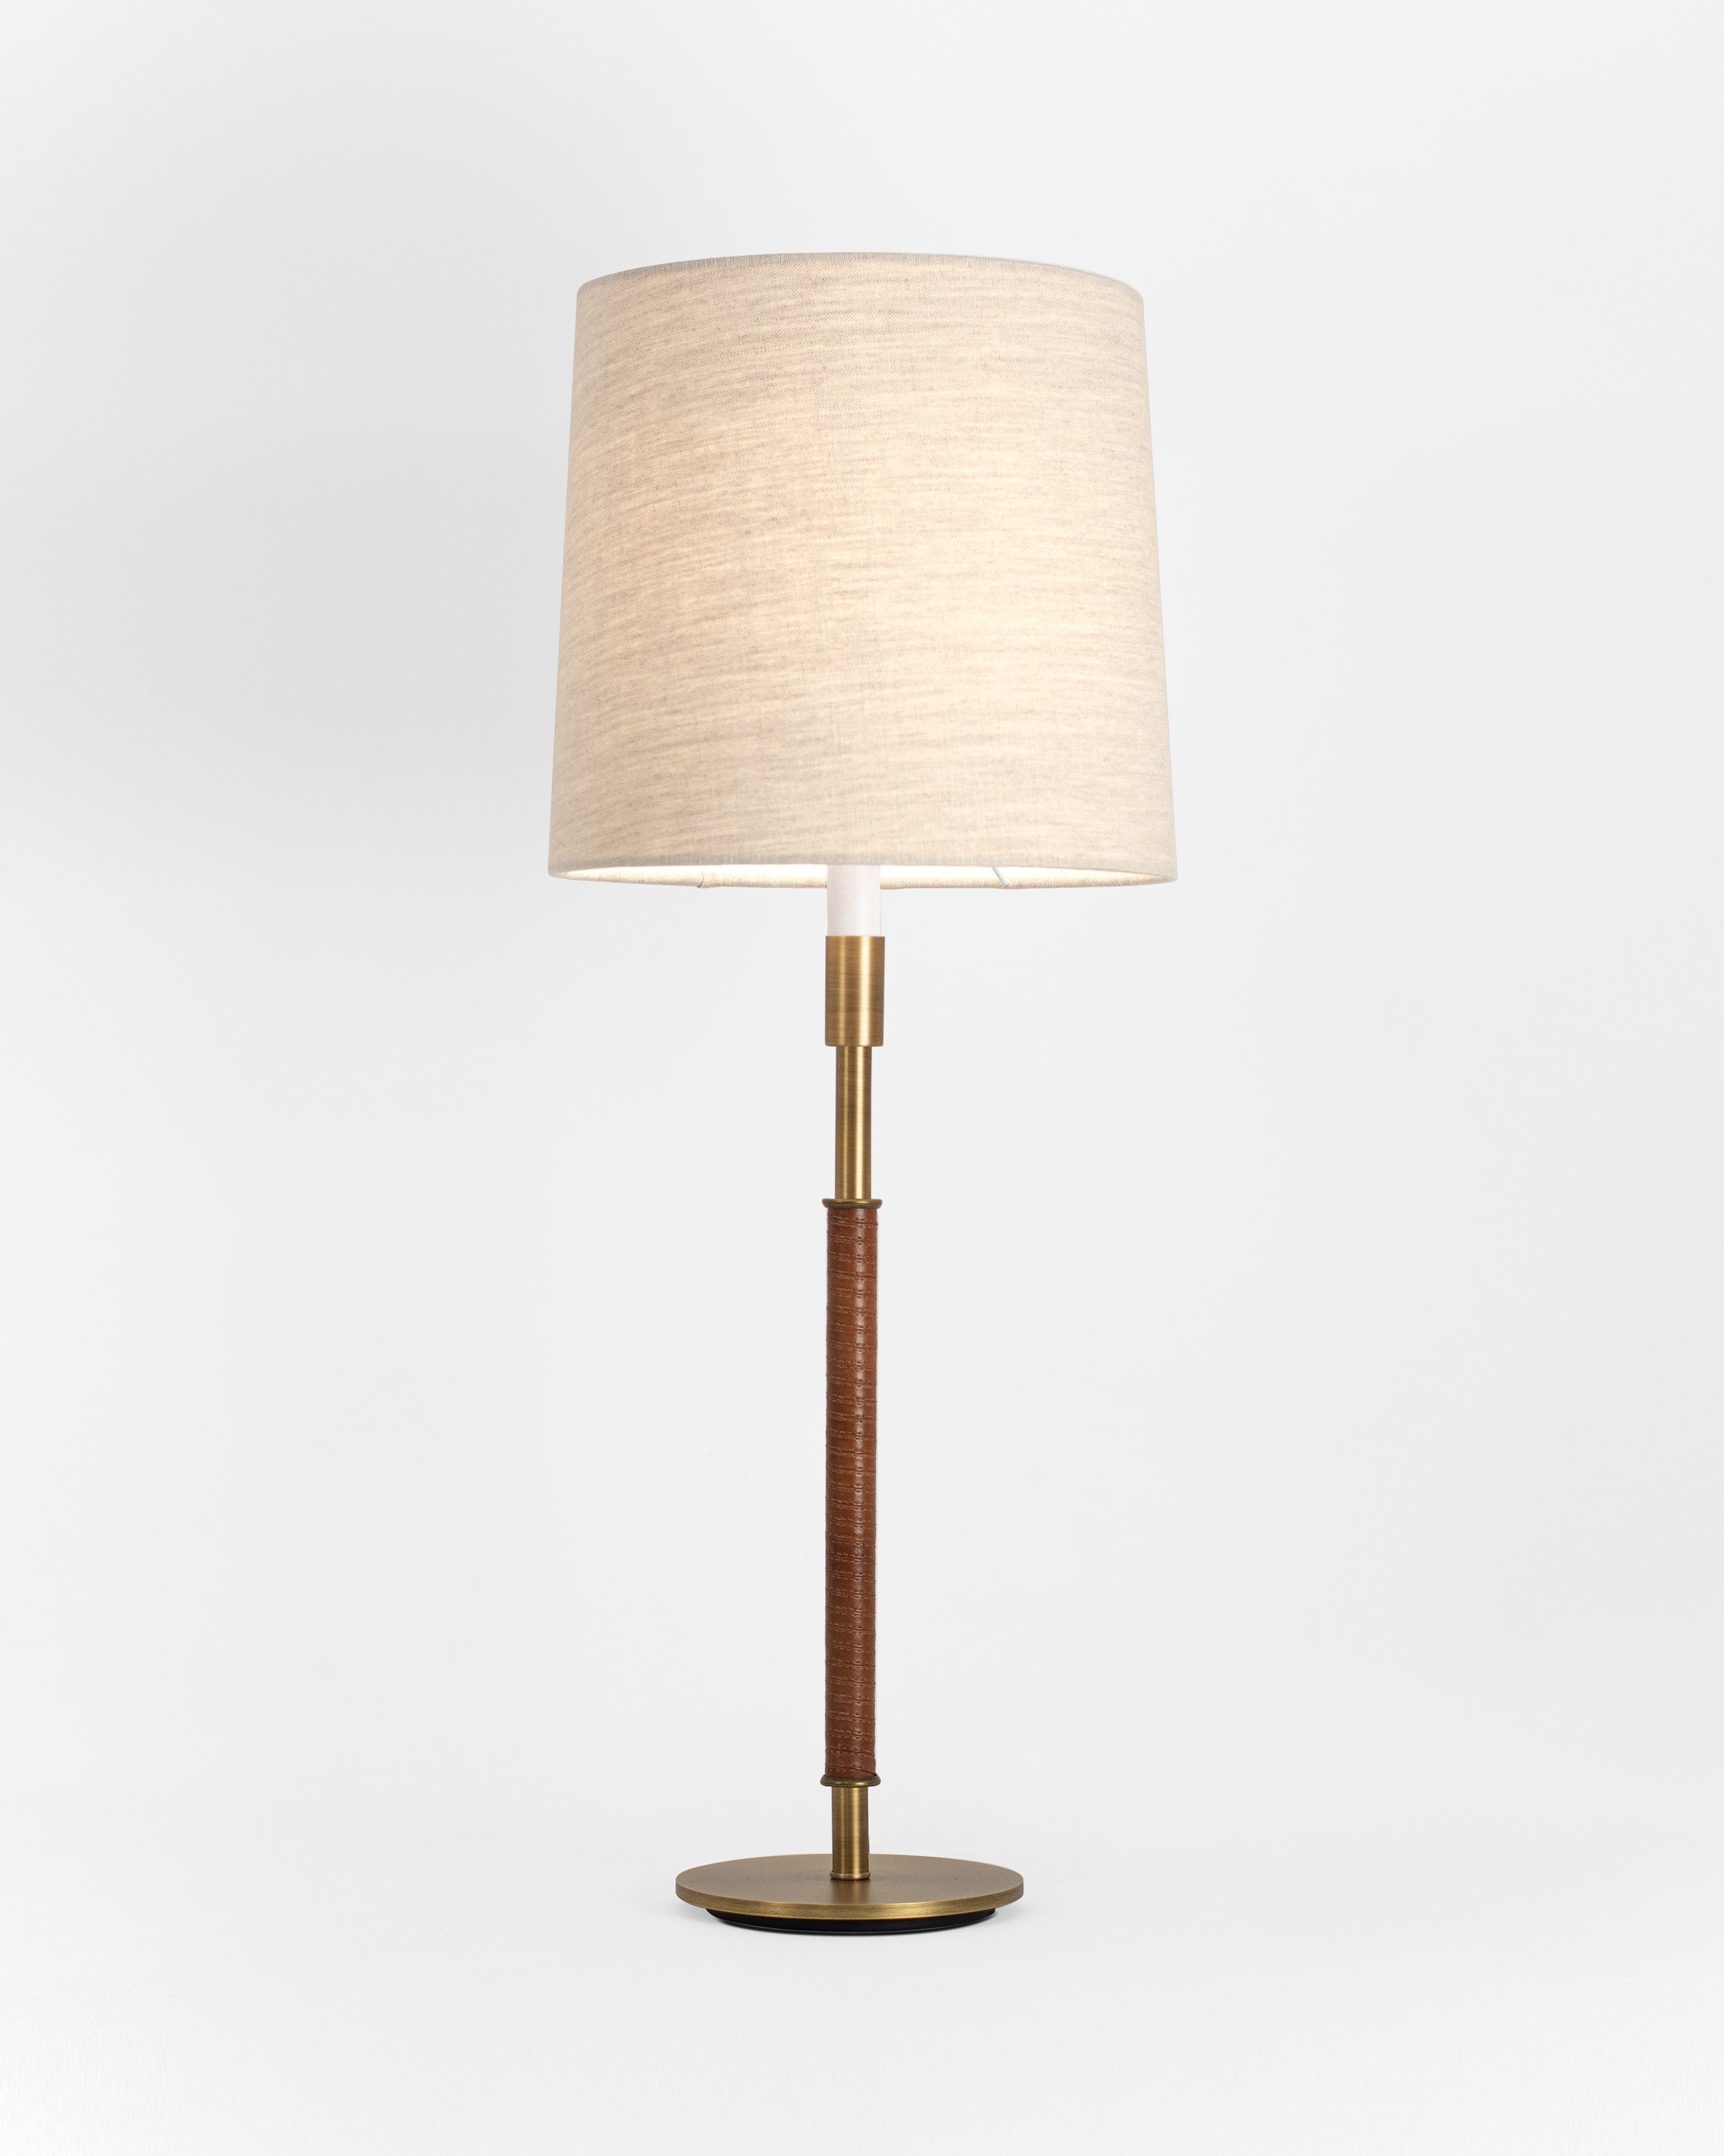 Light Antique Brass with Brown Leather and Natural Linen Shade